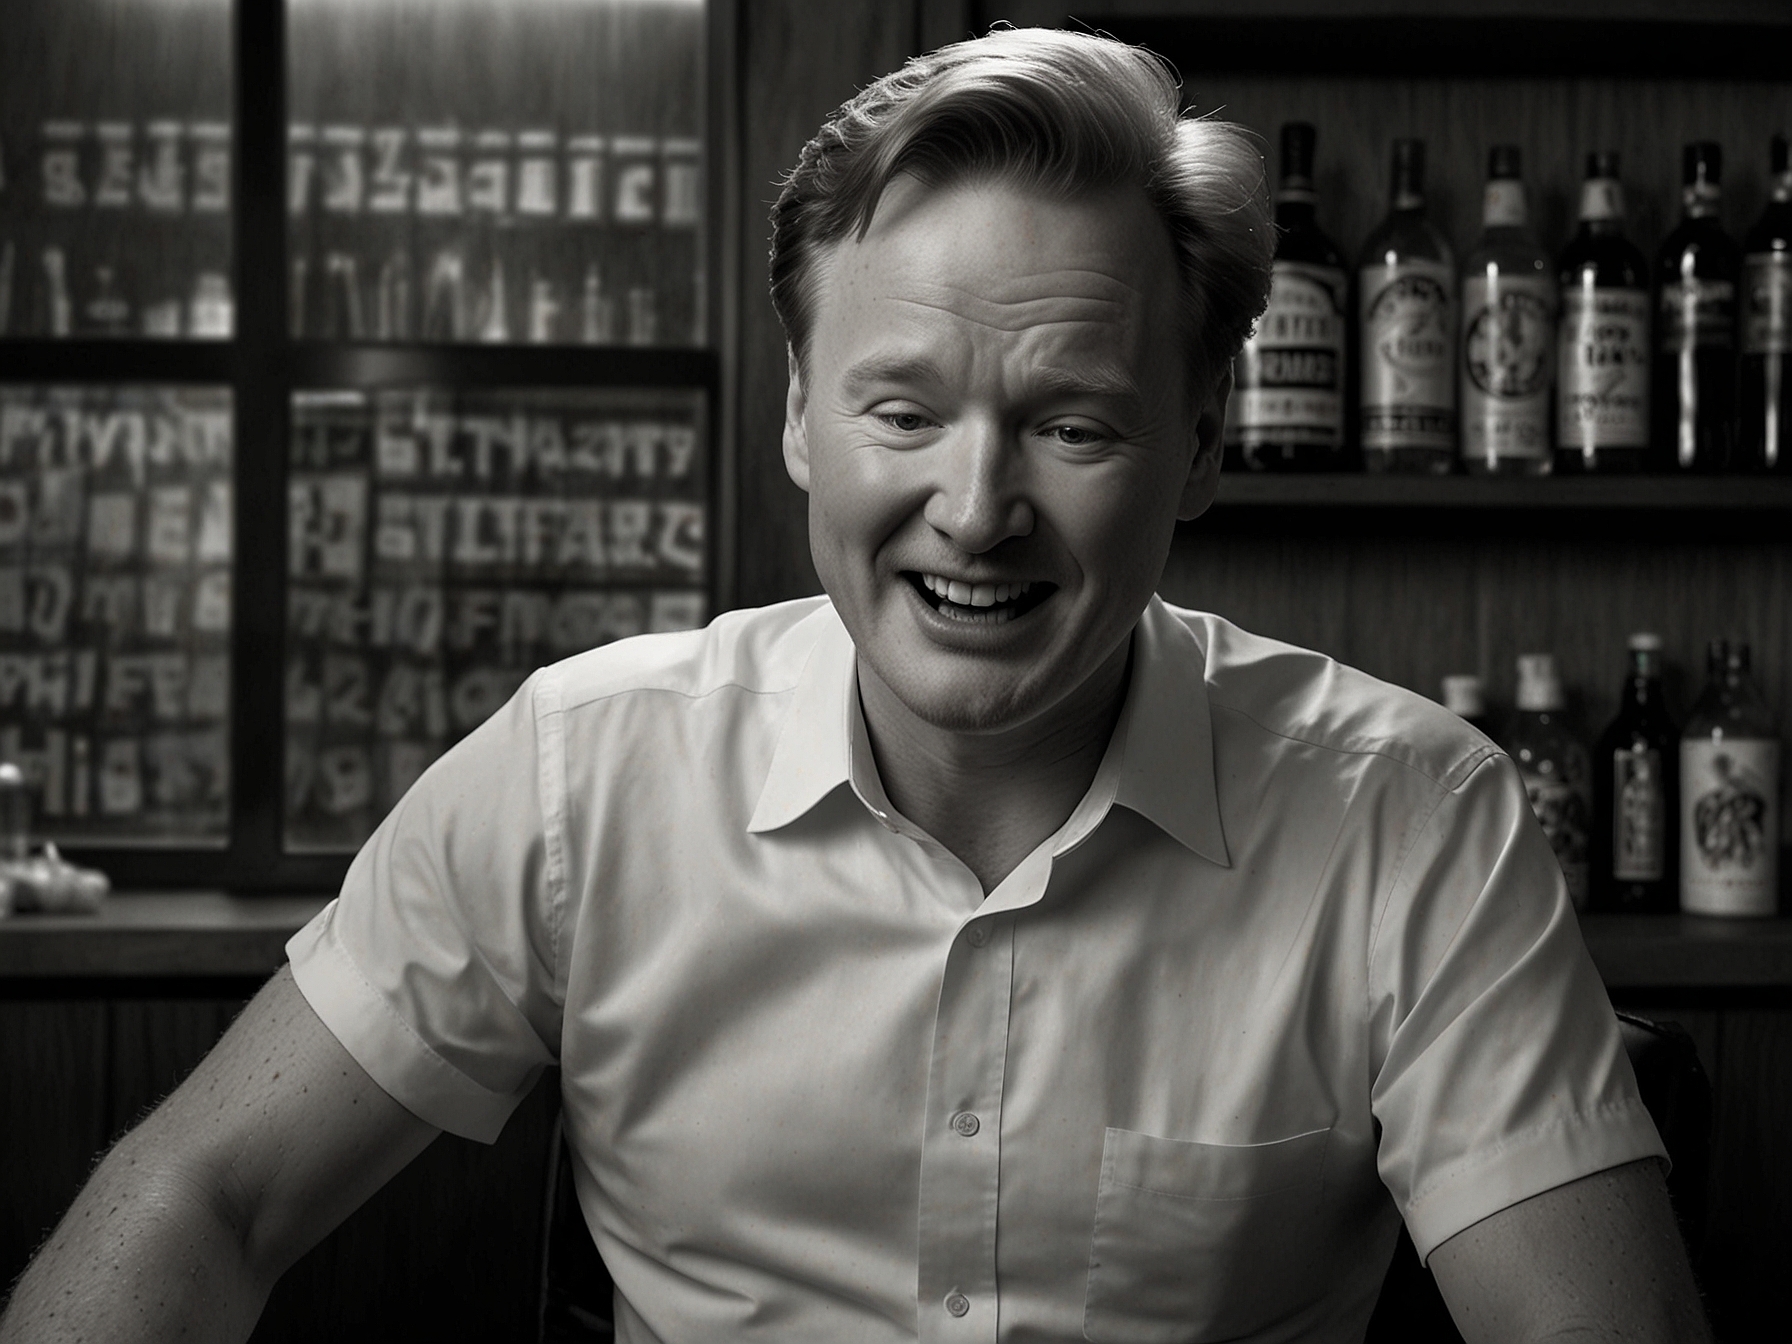 Conan O'Brien sweating and laughing while eating a spicy chicken wing during his appearance on 'Hot Ones', capturing the mix of humor and pain.